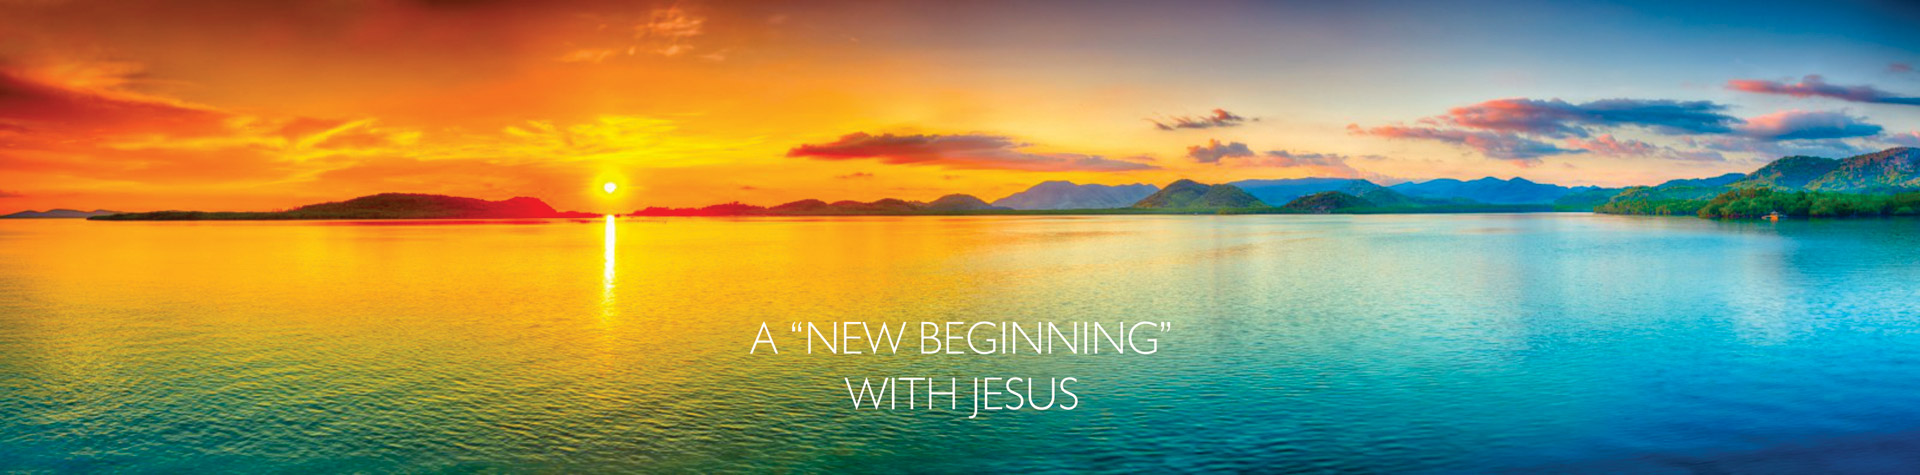 A New Beginning with Jesus